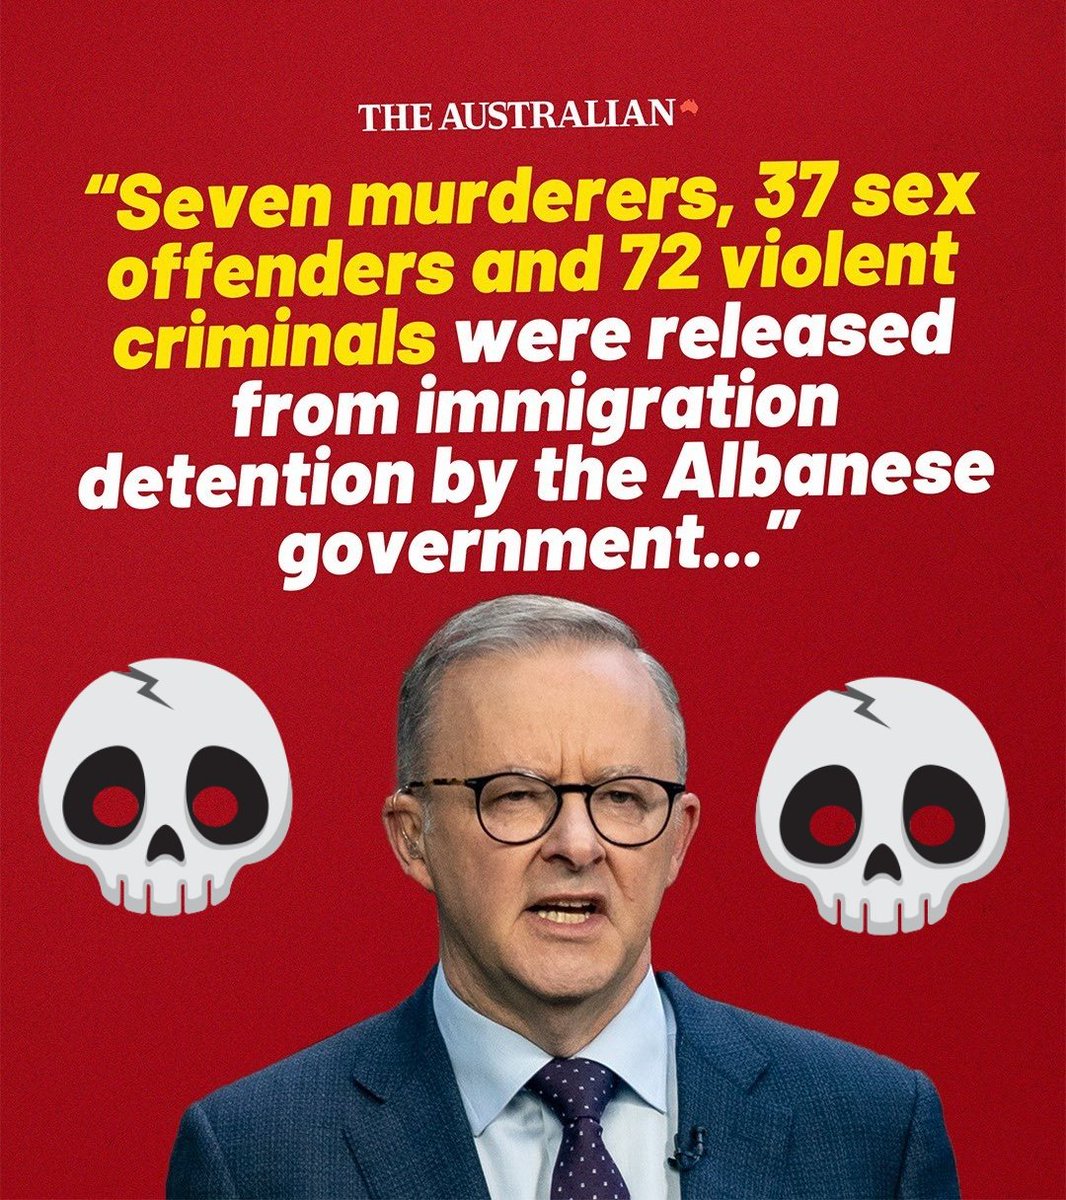 Beware 😡
The Anthony Albanese government has released 7 murderers, 72 dangerous criminals and 37 rapists from immigration retention centres these killers are roaming free on the streets. #Australia #CrimesAgainstHumanity #womenSecurity #CrimesAgainstWomen